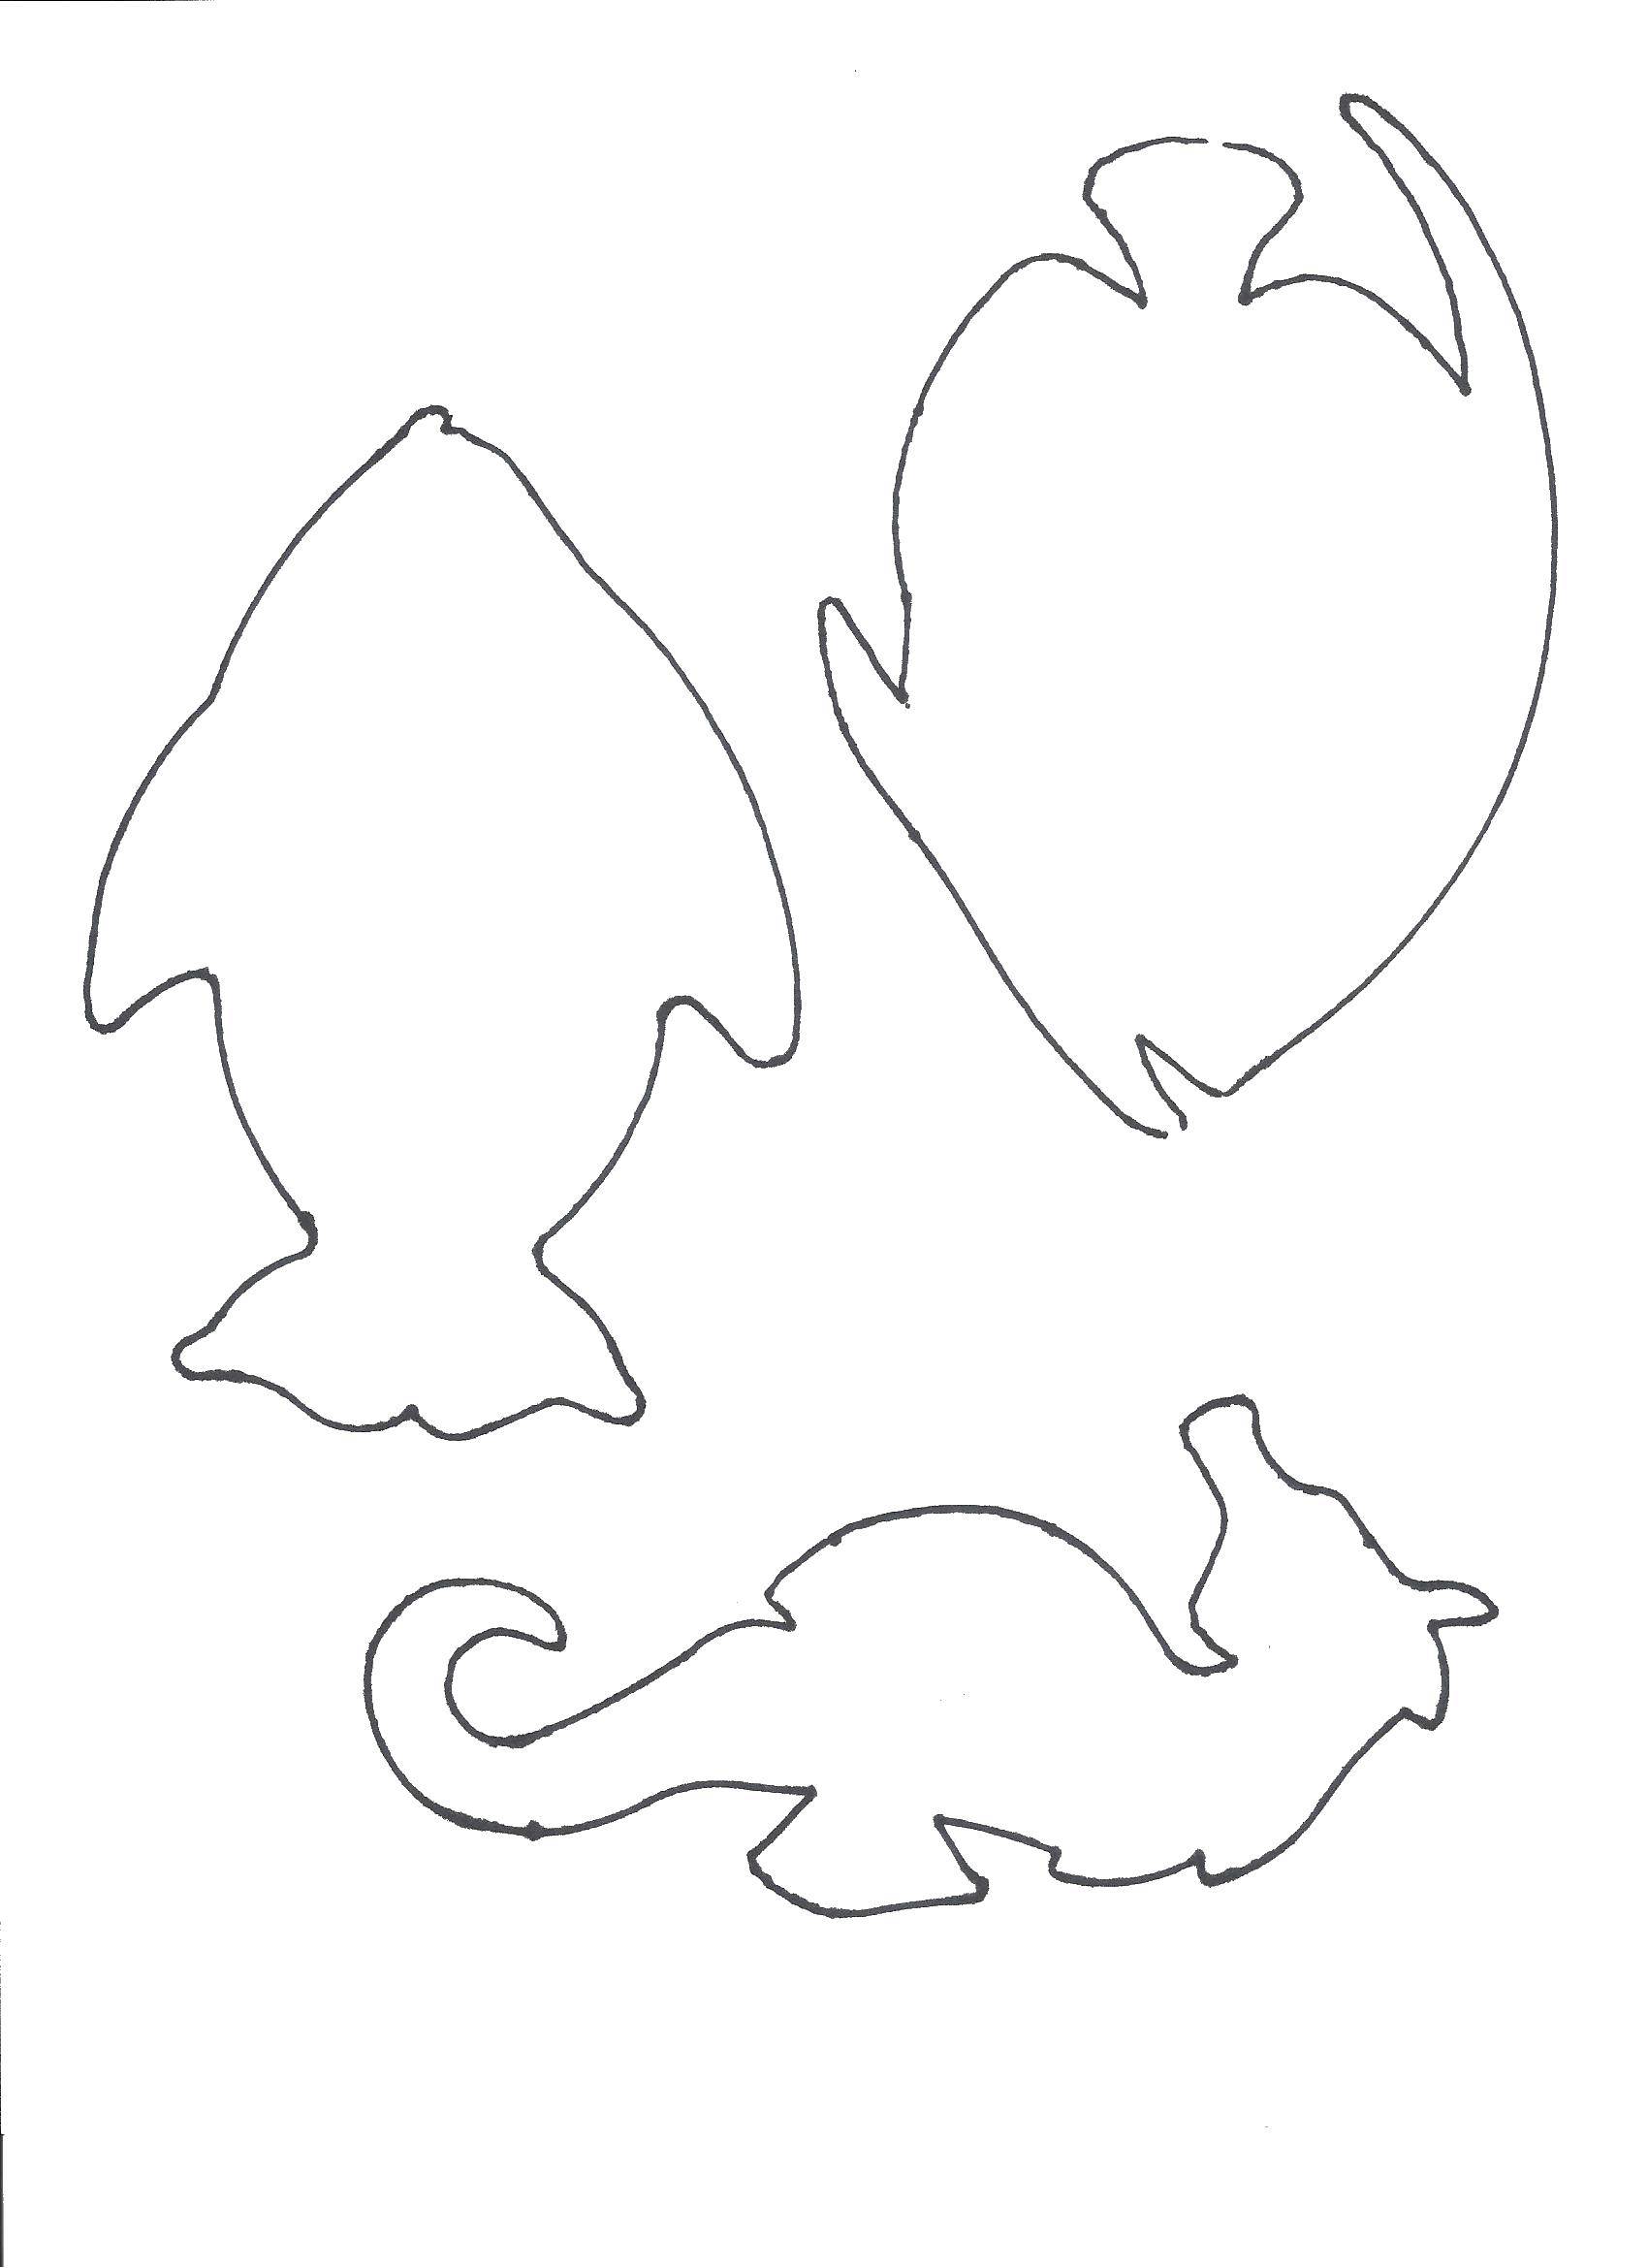 Coloring The contours of the fish. Category The contours of the fish to cut. Tags:  contours, fish.